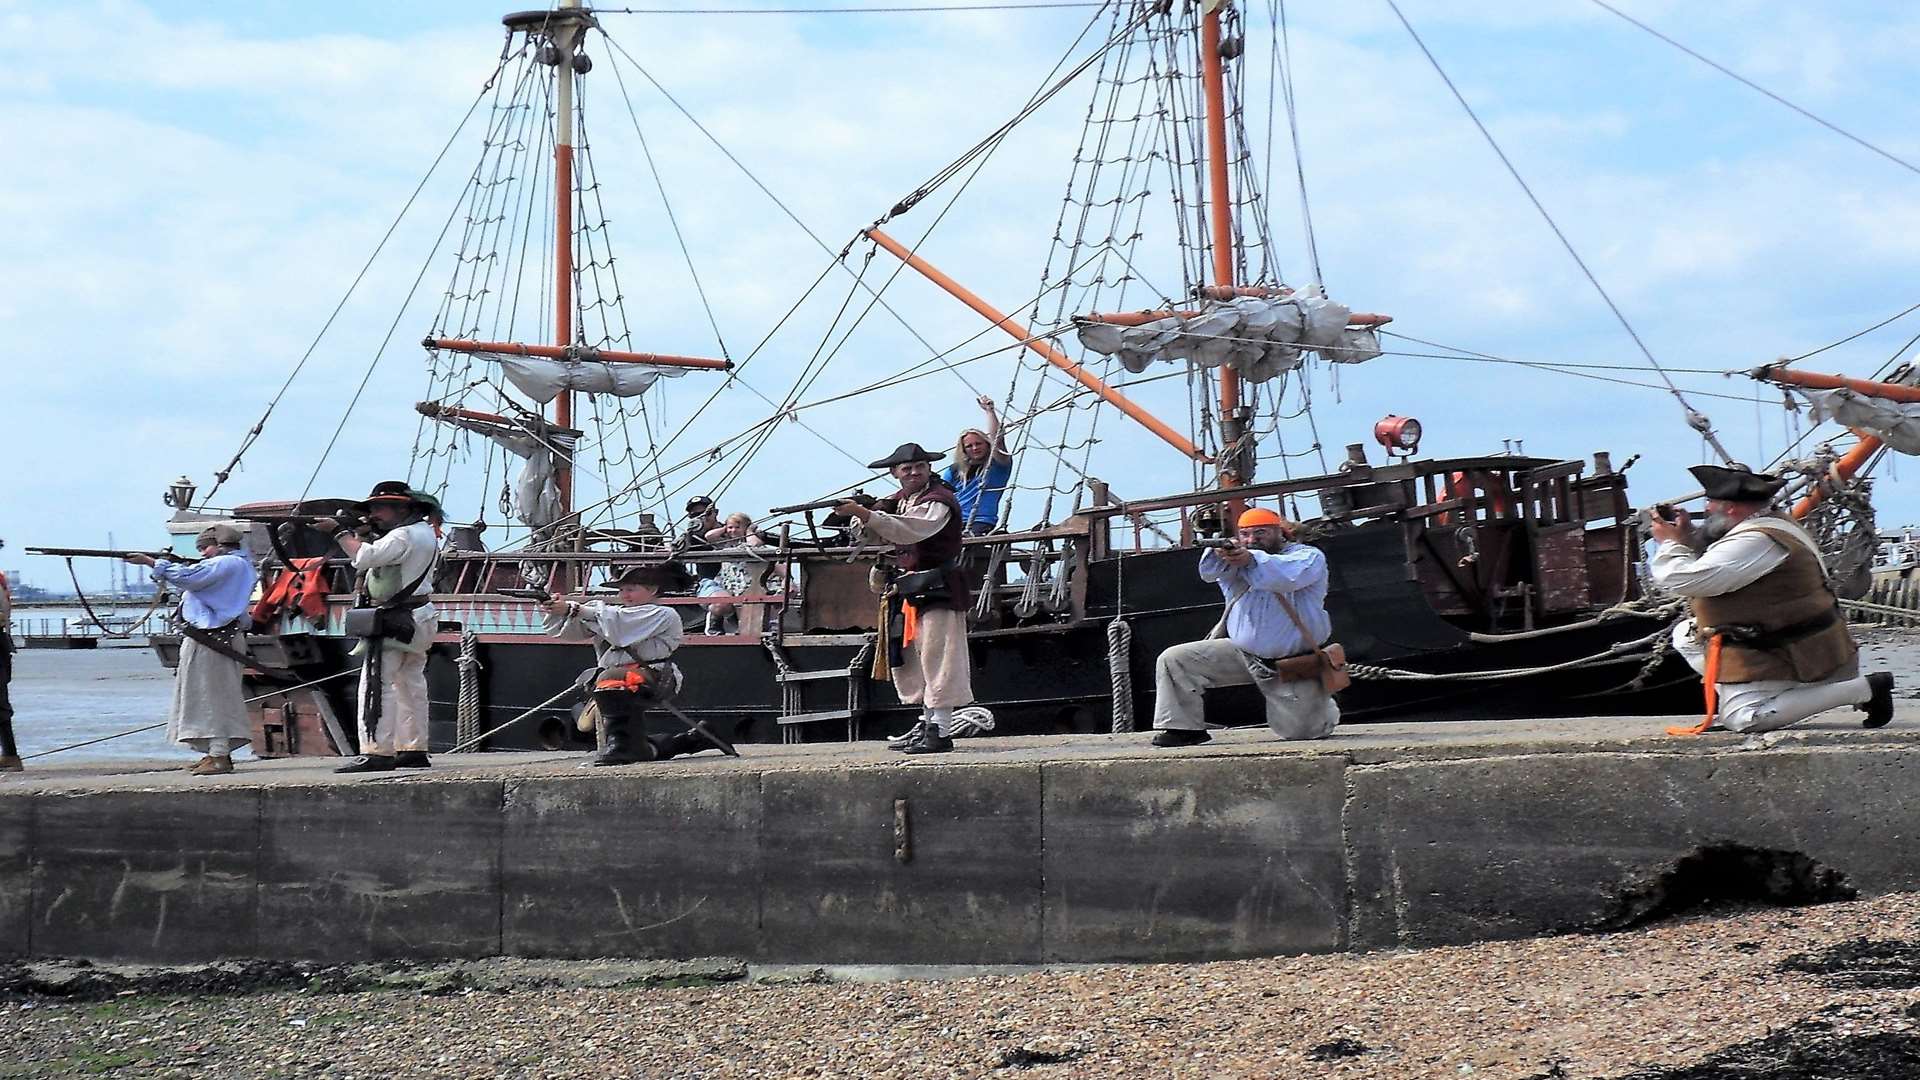 Take aim: The Sheppey Pirates led by Captain Cutlass (Adrian Collins) made a noisy entrance with muskets to mark the 350th anniversary of the Dutch invasion of Queenborough. Picture:George Poules